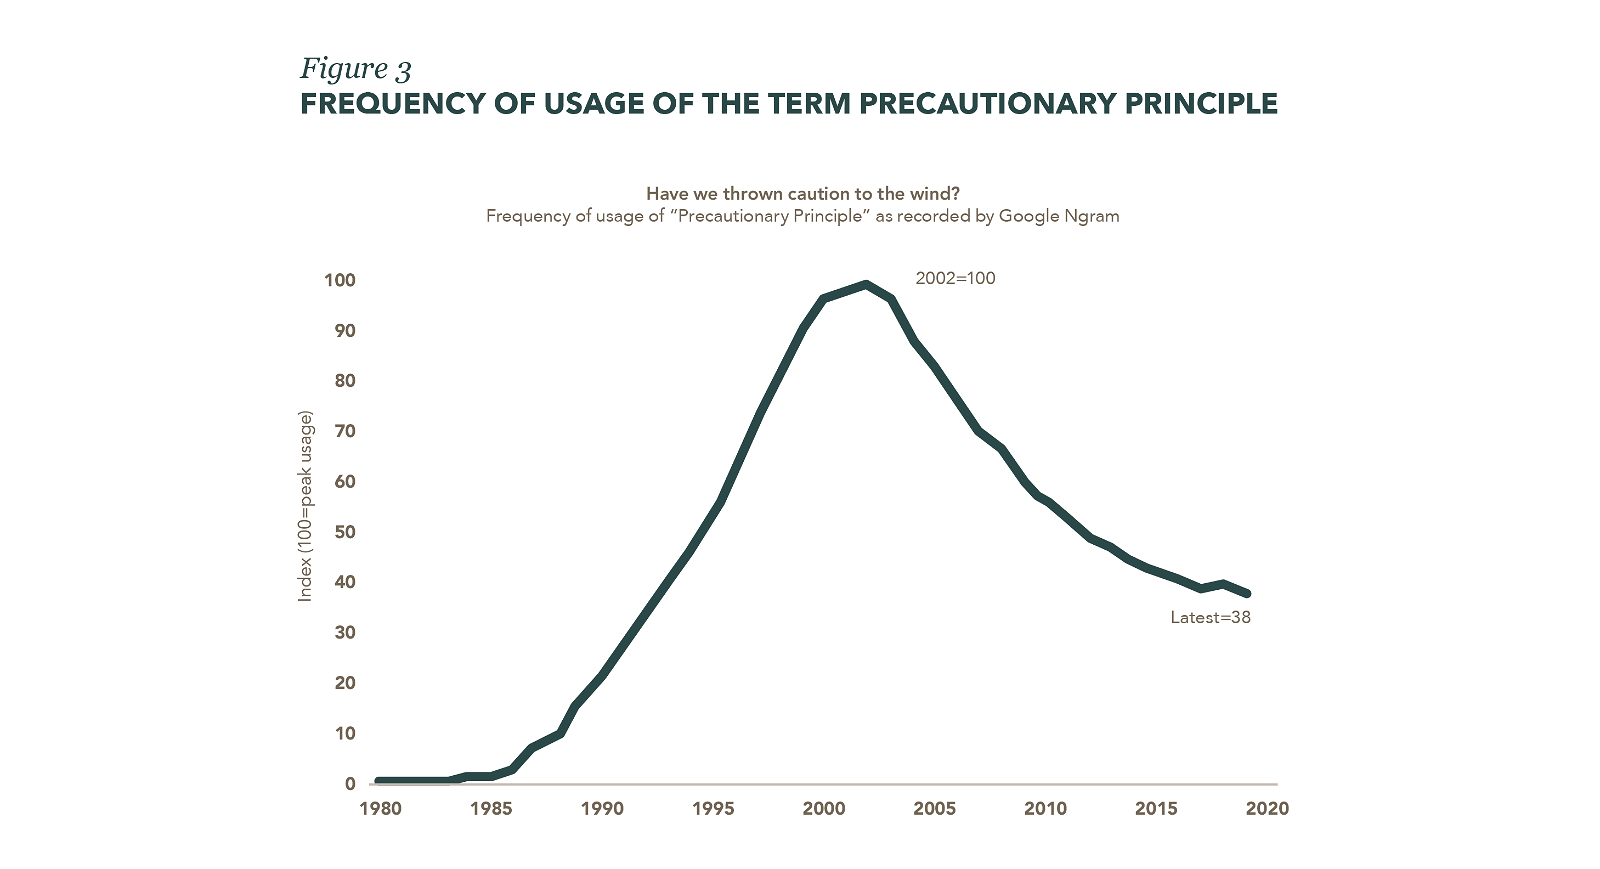 Frequency of the usage of the term precautionary principle